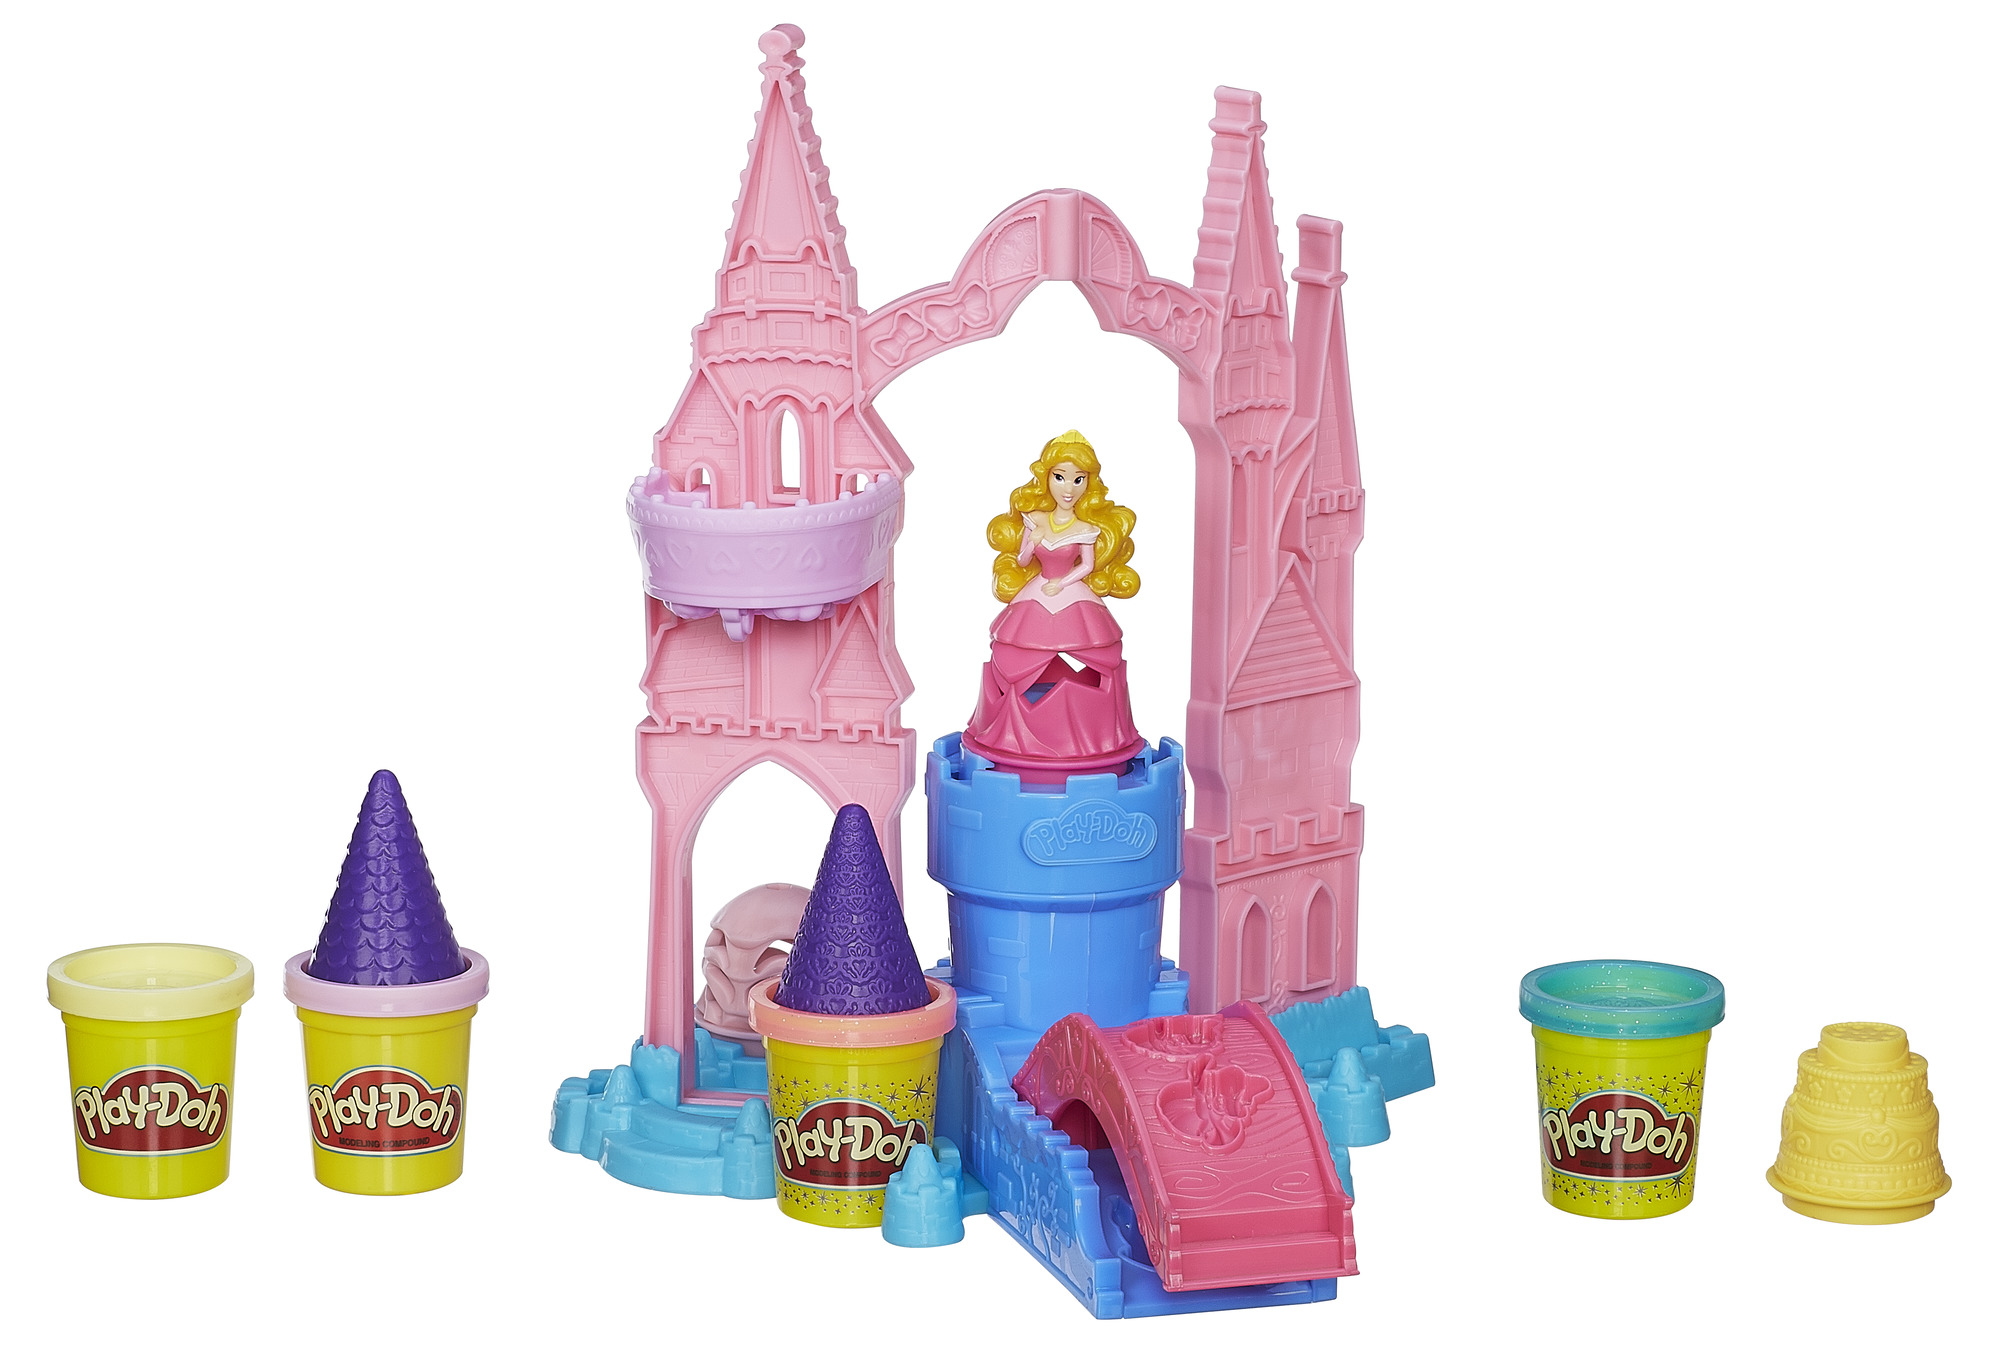 Play-Doh Disney Mix 'N Match Magical Designs Palace Set with Princess Aurora & 4 Cans of Sparkle Play-Doh - image 2 of 13